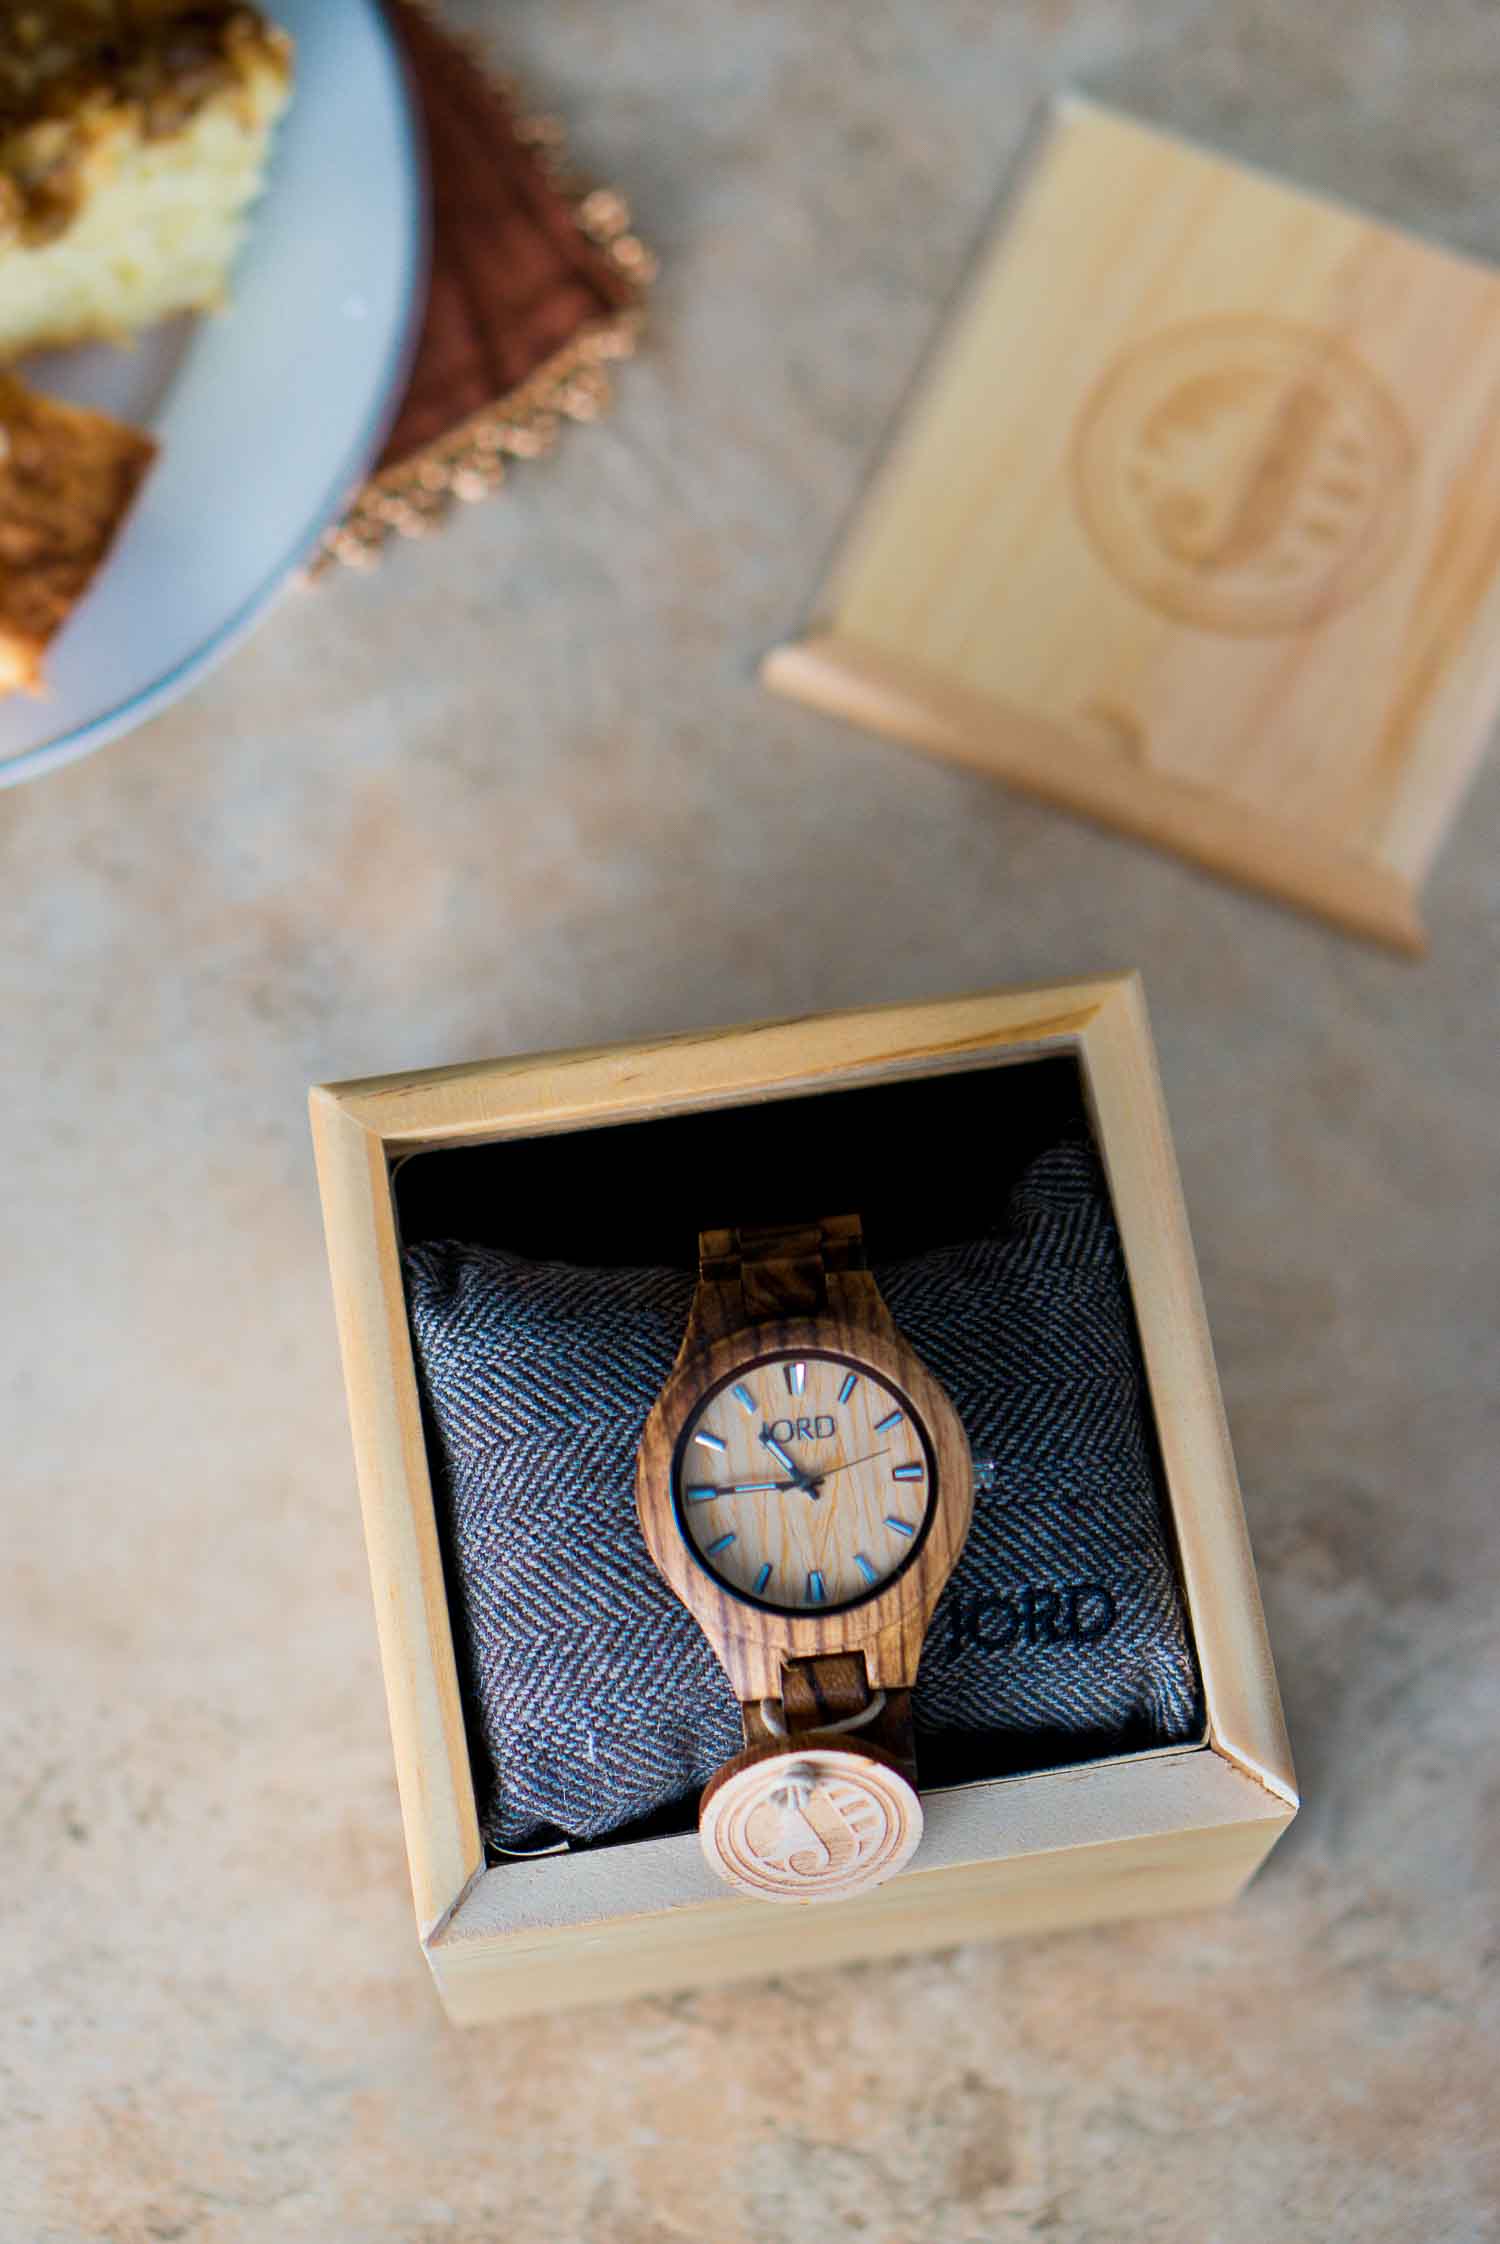 A close up of a watch in a box